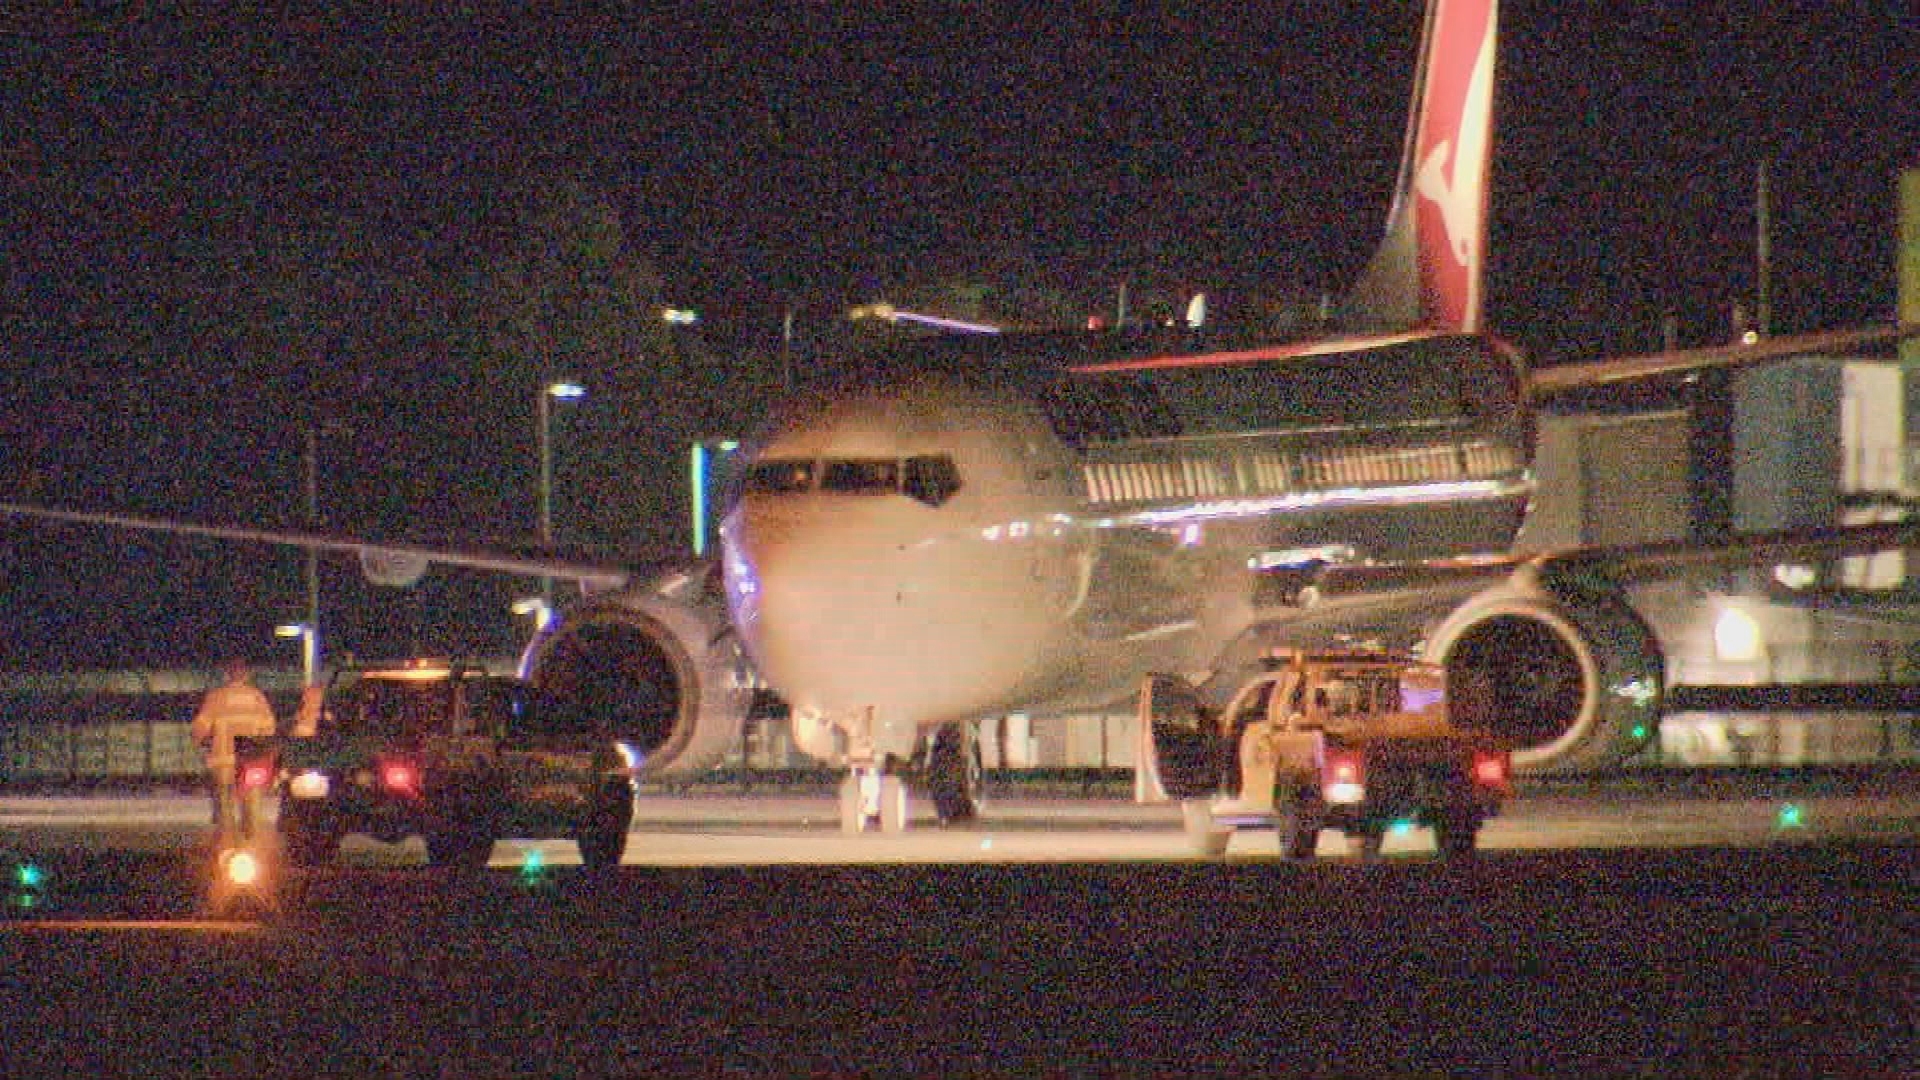 About 120 Qantas customers were stranded inside the plane, with no food or water.